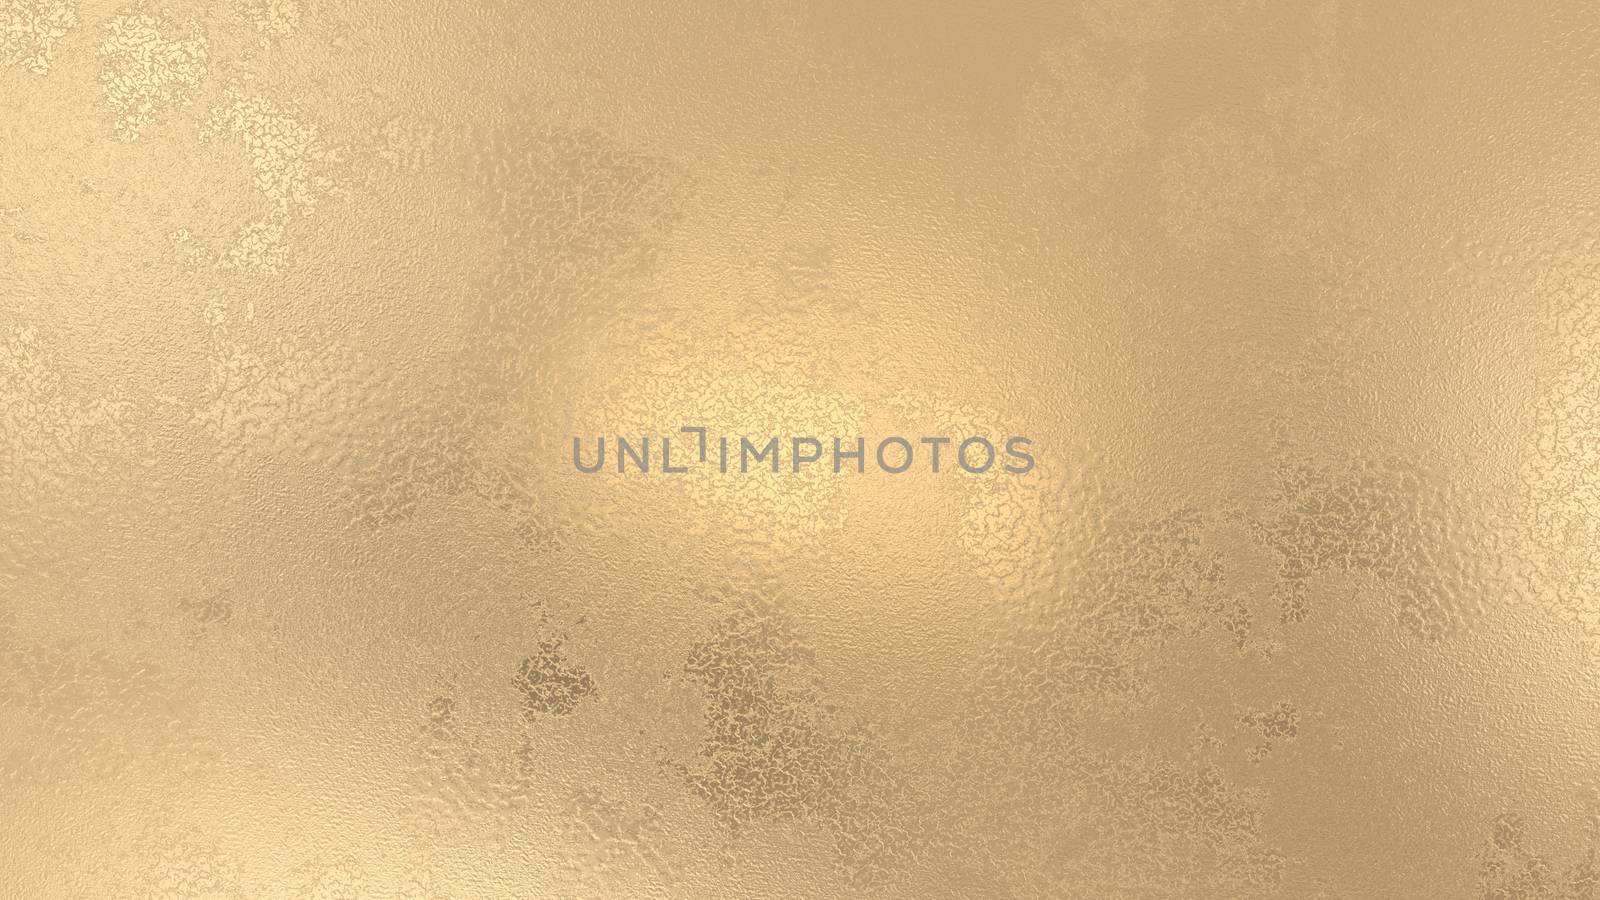 3d render abstract gold background. Golden shiny backdrop. Luxury bright shiny illustration for poster, banner, sale design. Bronze, copper.